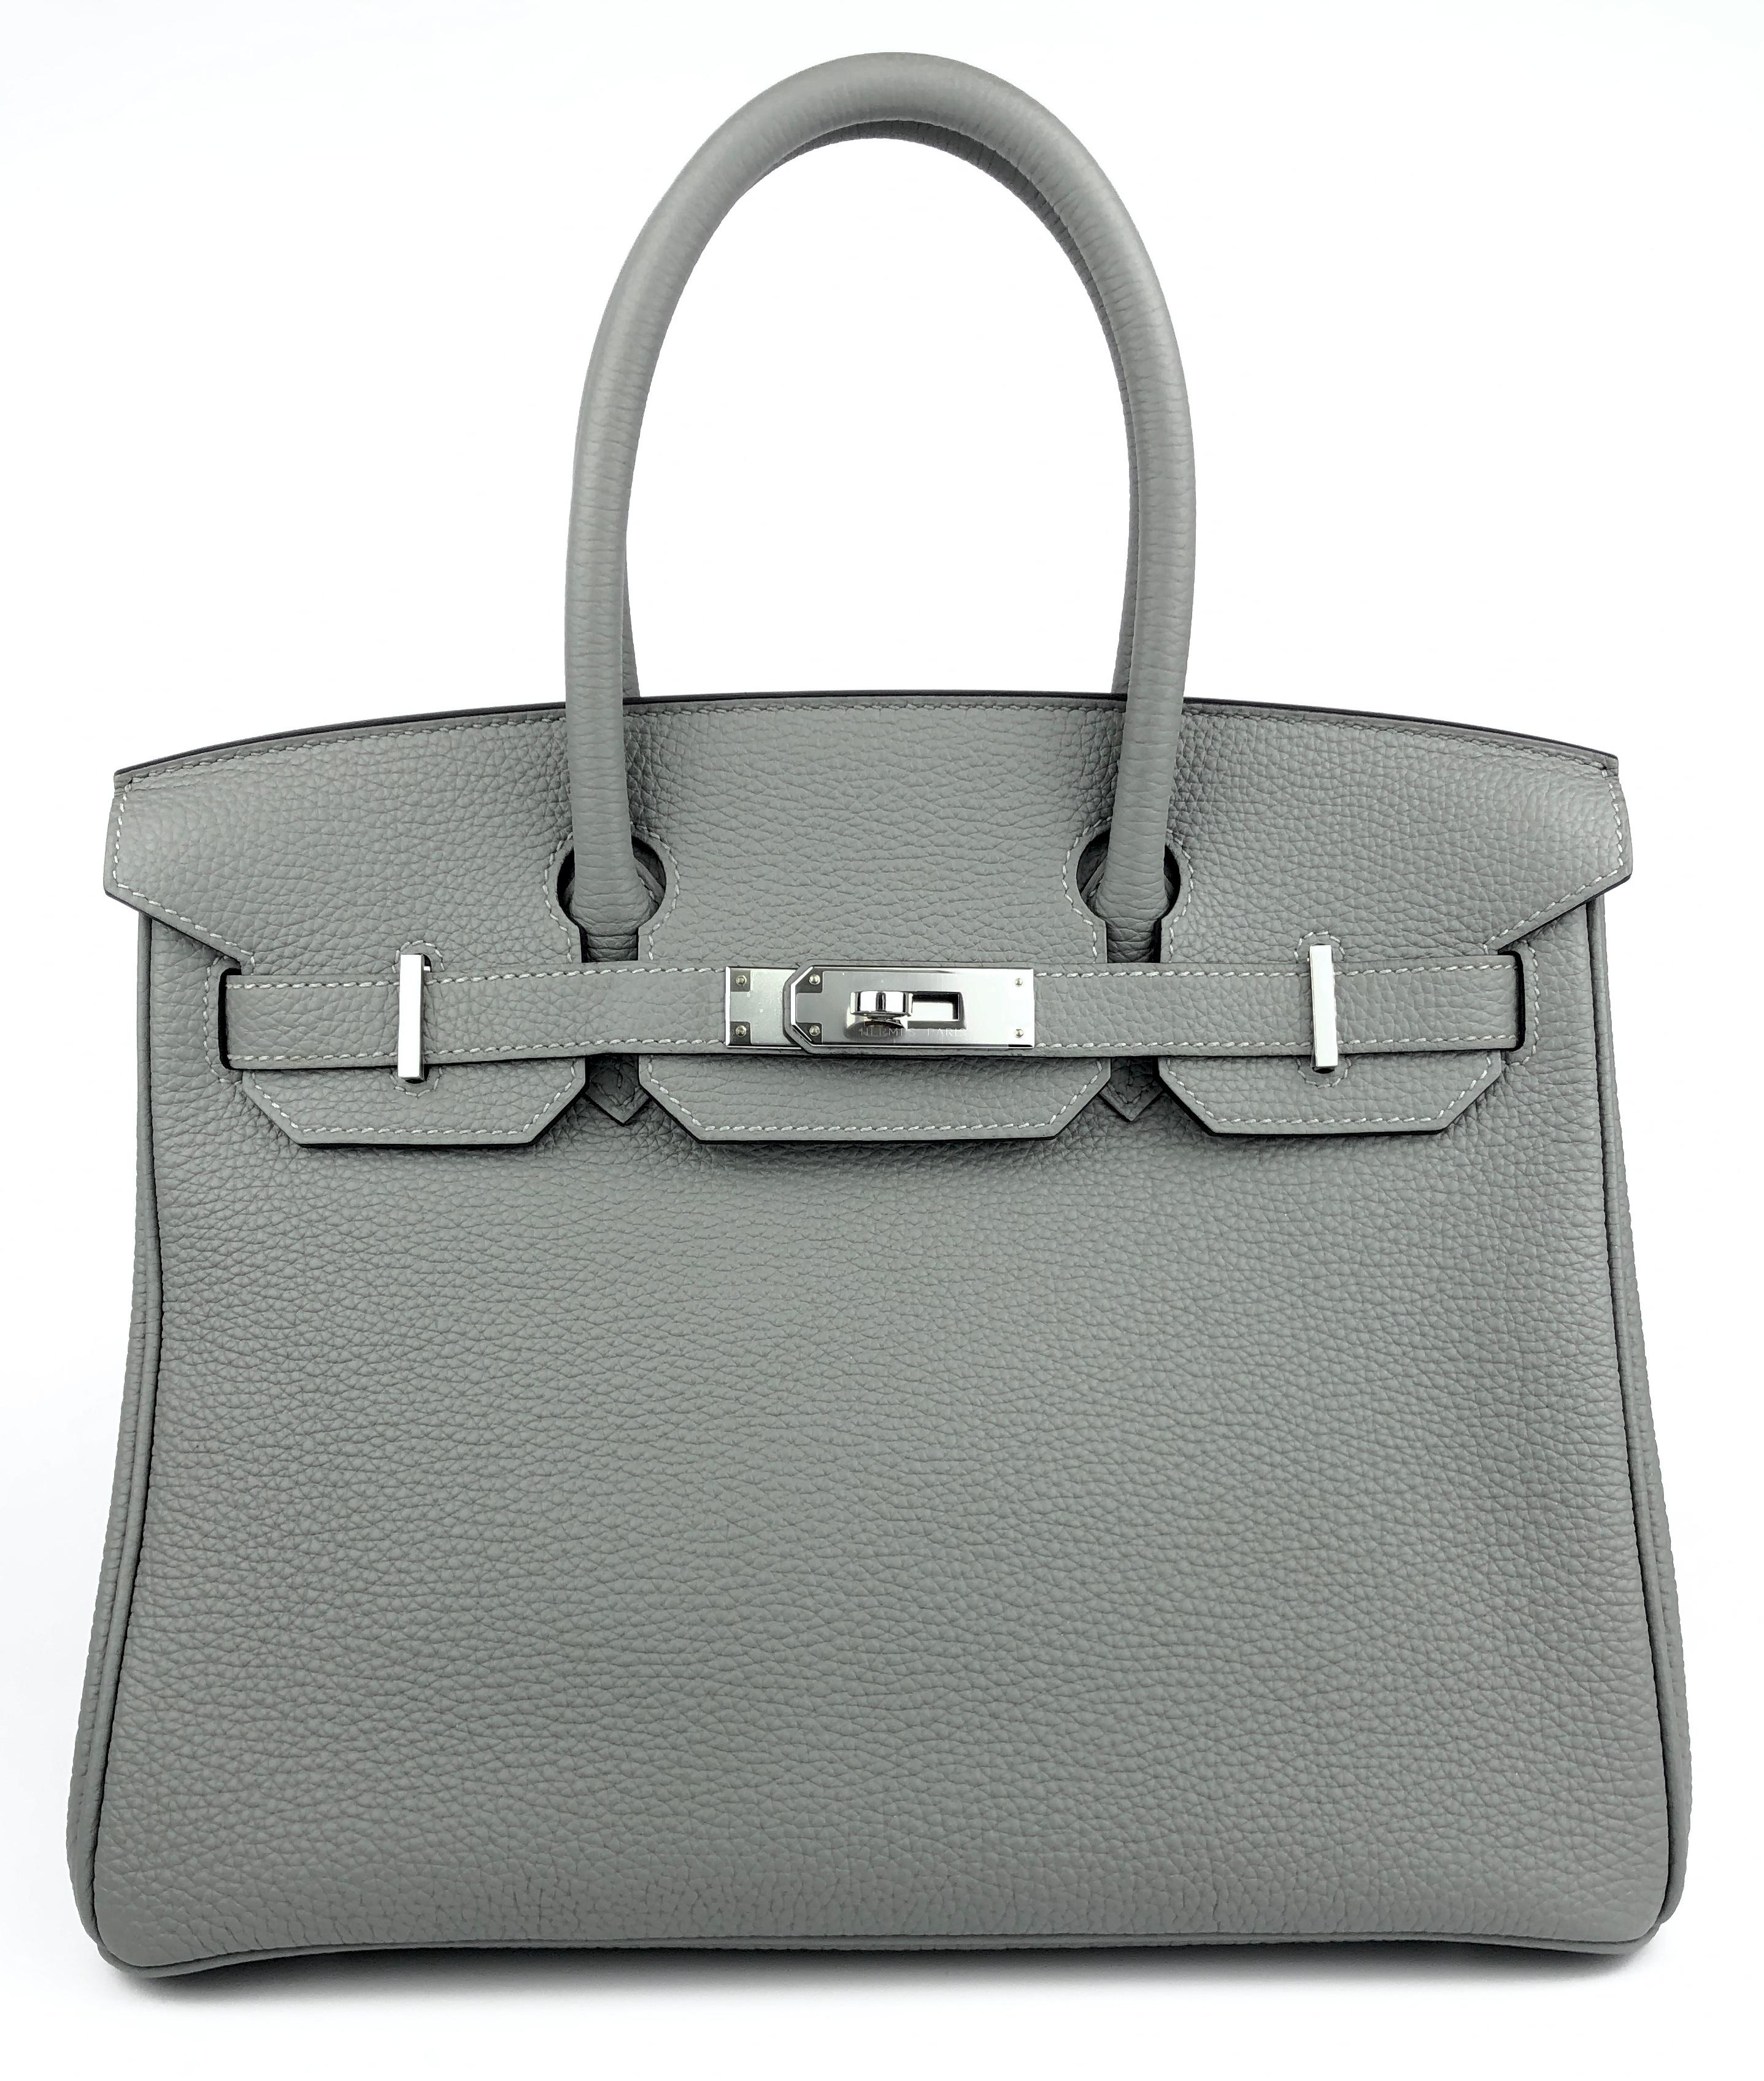 Stunning Rare Hermes Birkin 30 Gris Mouette Palladium Hardware. Pristine Condition, Plastic on Hardware. Perfect corners and Structure. X Stamp 2016.

Shop with Confidence from Lux Addicts. Authenticity Guaranteed!

Lux Addicts is a Premier Luxury